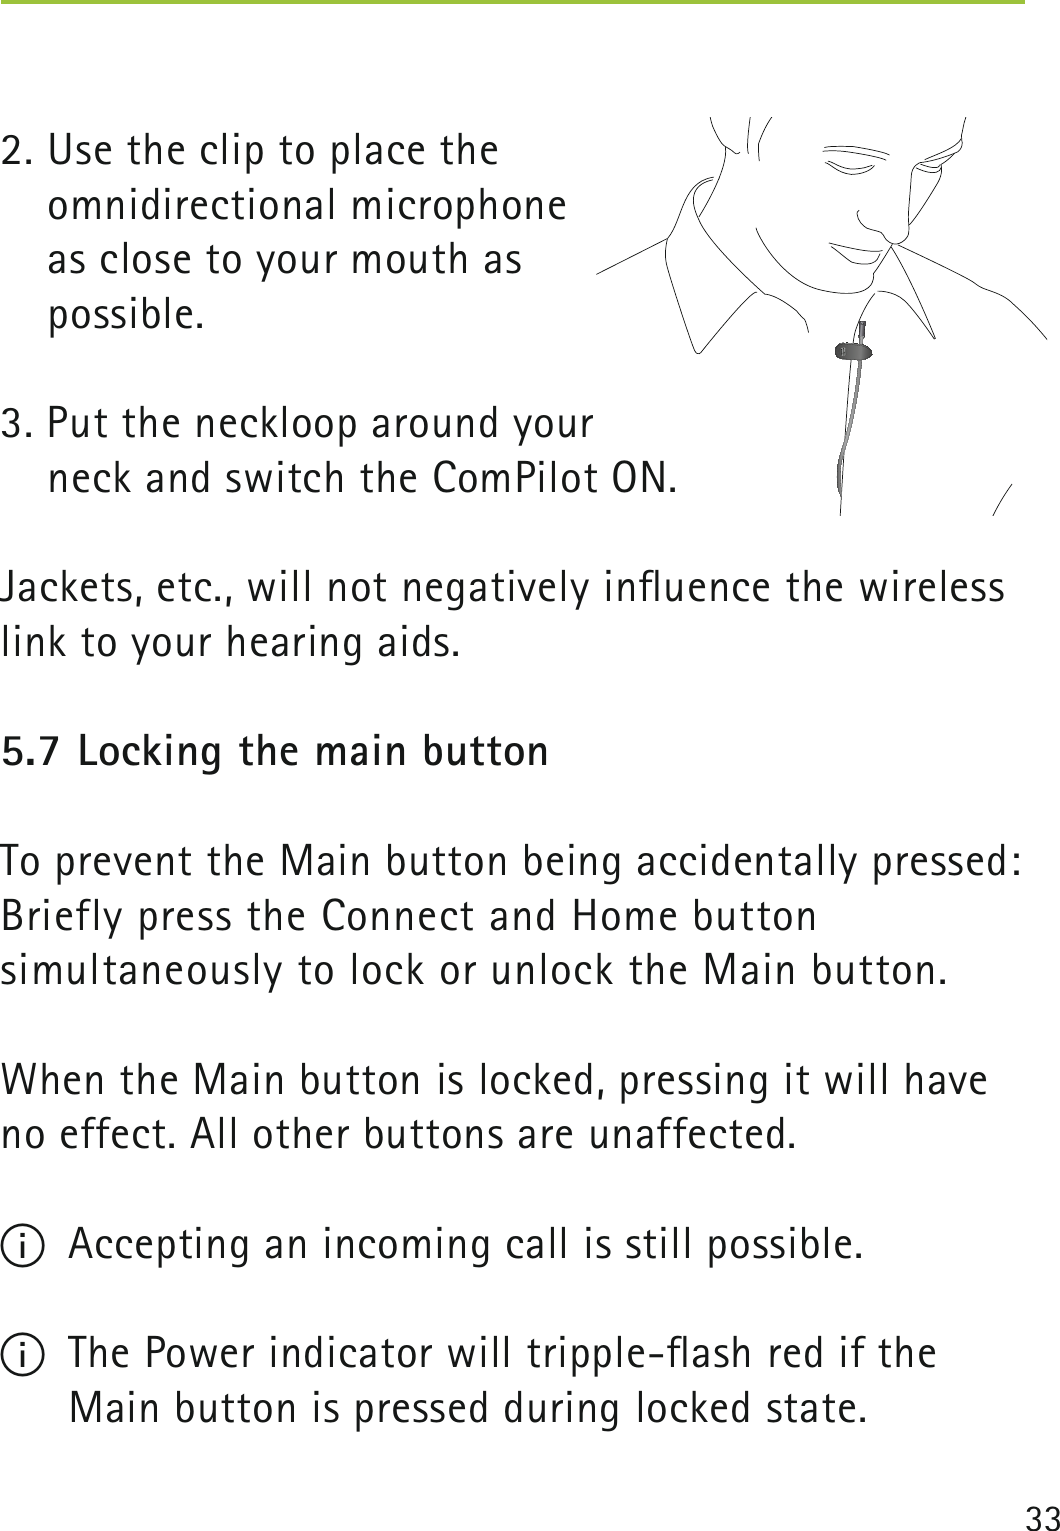 332. Use the clip to place the  omnidirectional microphone  as close to your mouth as  possible.3. Put the neckloop around your   neck and switch the ComPilot ON.Jackets, etc., will not negatively inﬂuence the wireless link to your hearing aids.5.7 Locking the main buttonTo prevent the Main button being accidentally pressed: Briefly press the Connect and Home button  simultaneously to lock or unlock the Main button. When the Main button is locked, pressing it will have no effect. All other buttons are unaffected.I  Accepting an incoming call is still possible.I  The Power indicator will tripple-ﬂash red if the Main button is pressed during locked state. 